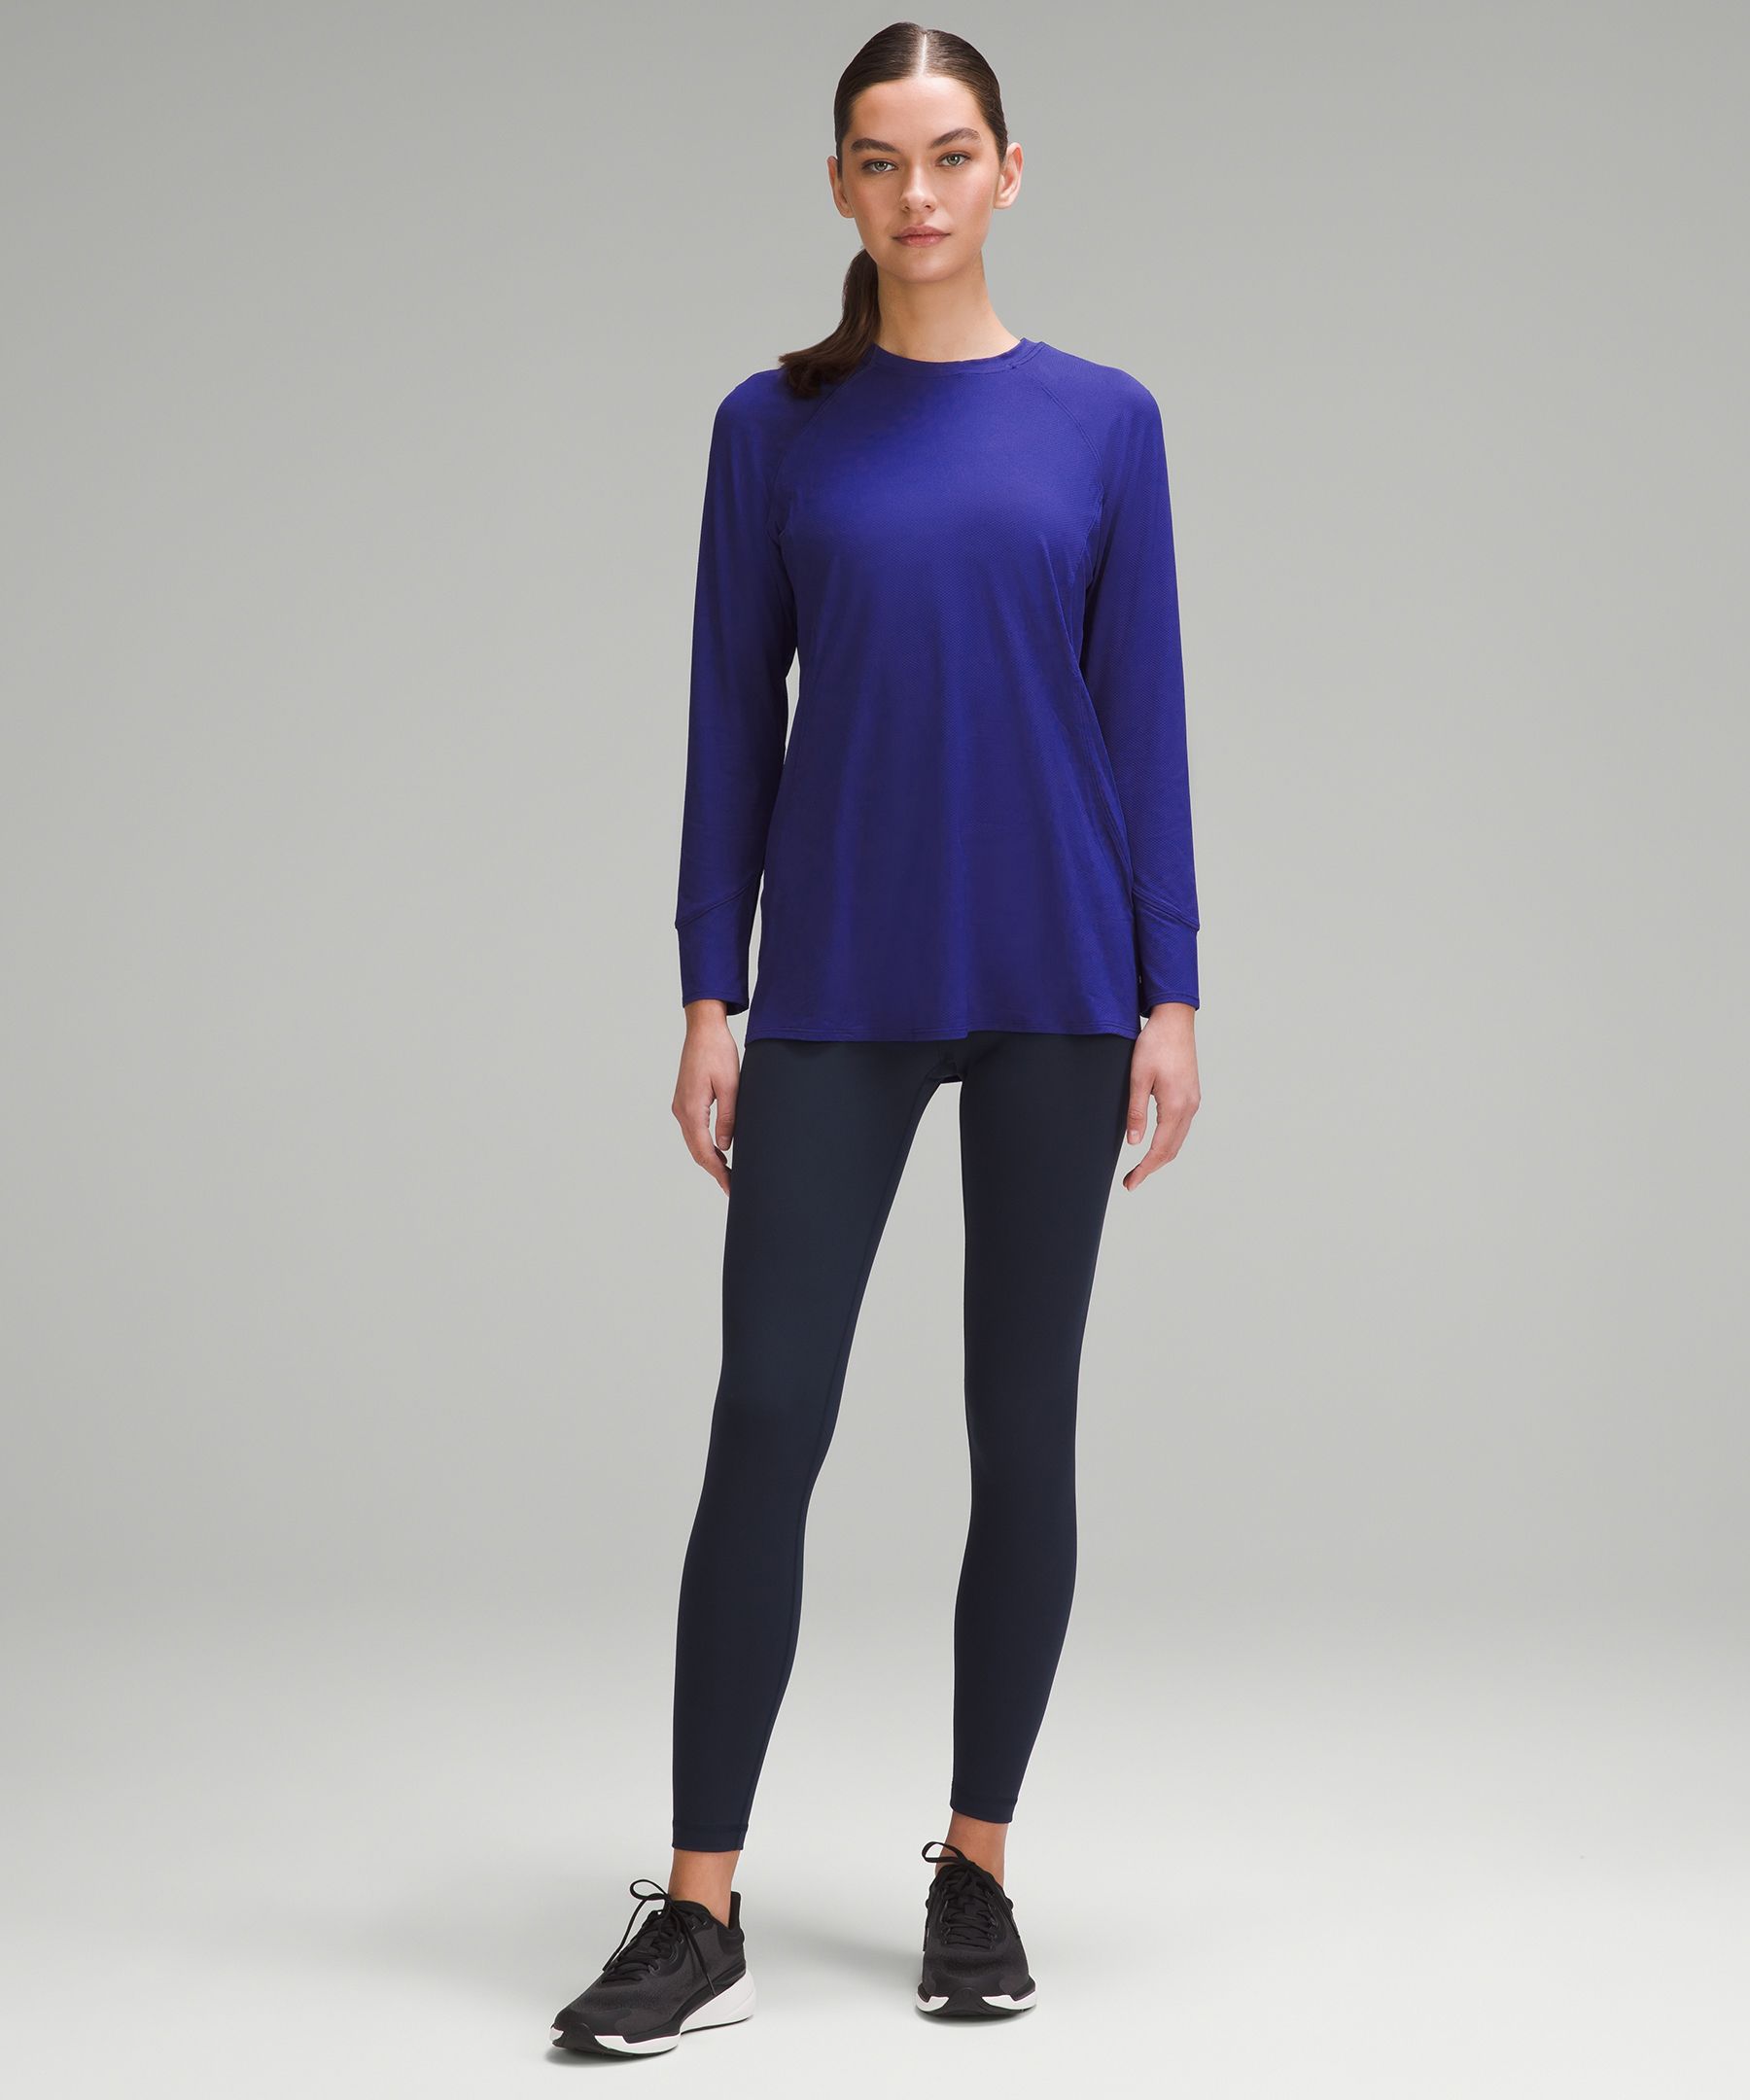 Abrasion-Resistant High-Coverage Long-Sleeve Shirt | Women's Long Sleeve Shirts